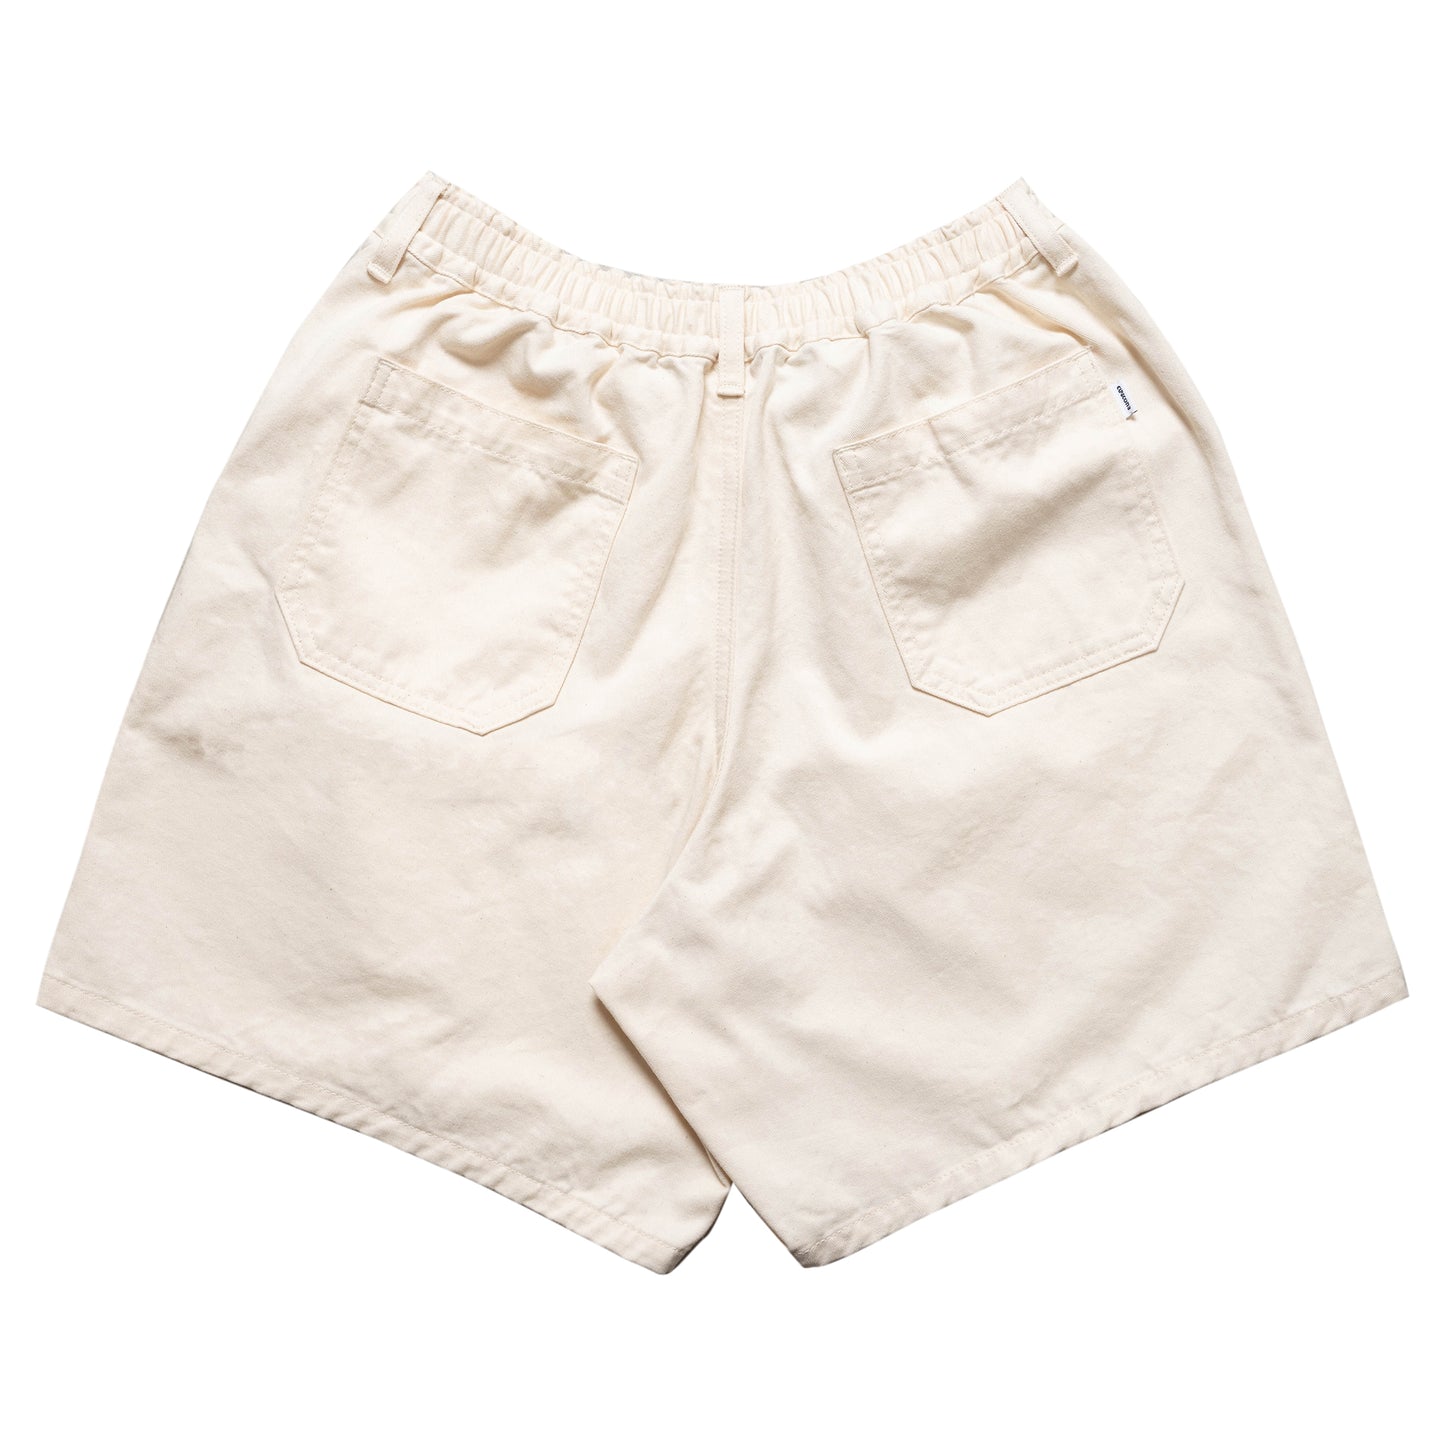 Cotton Twill Baggy Shorts - Natural